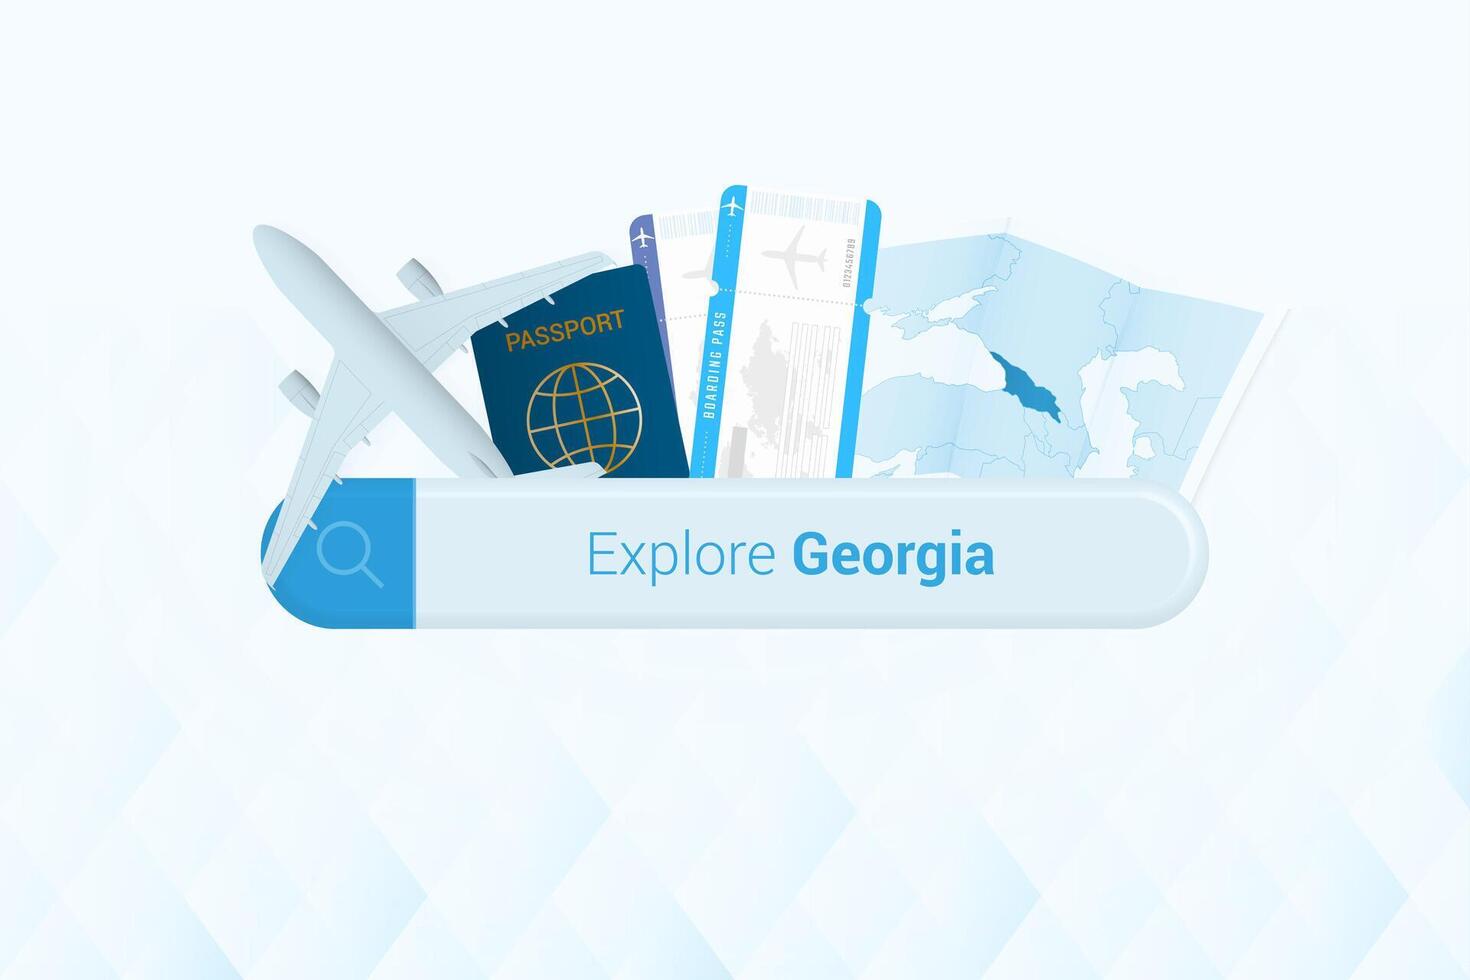 Searching tickets to Georgia or travel destination in Georgia. Searching bar with airplane, passport, boarding pass, tickets and map. vector